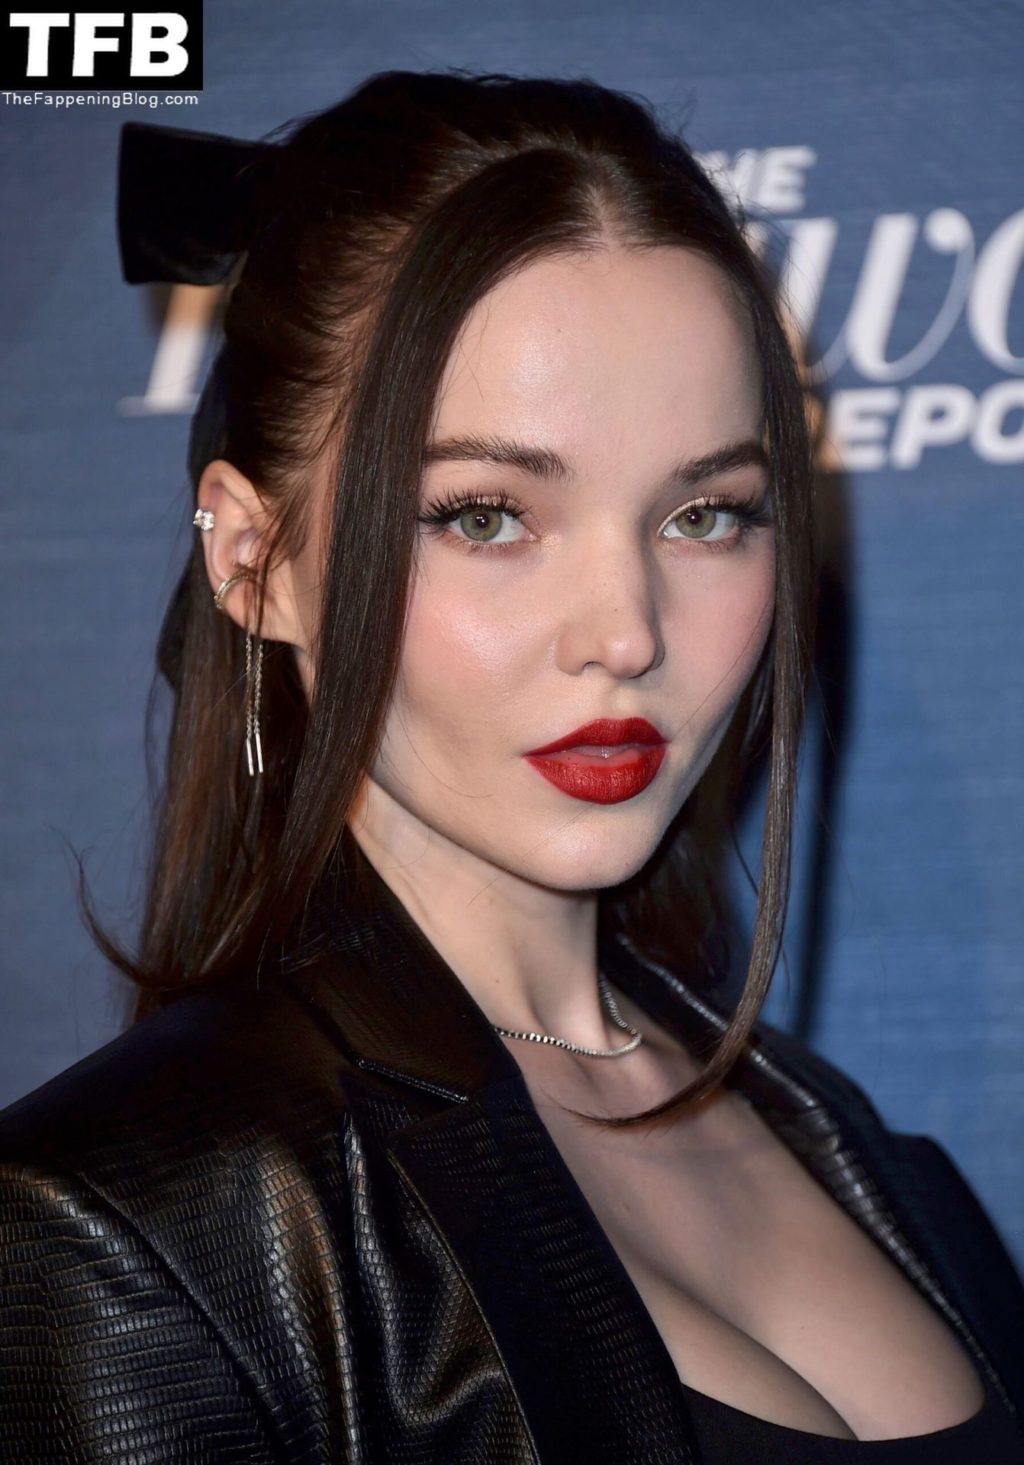 Dove Cameron Attends The Hollywood Reporter’s Oscar Nominees Night in Beverly Hills (35 Photos)